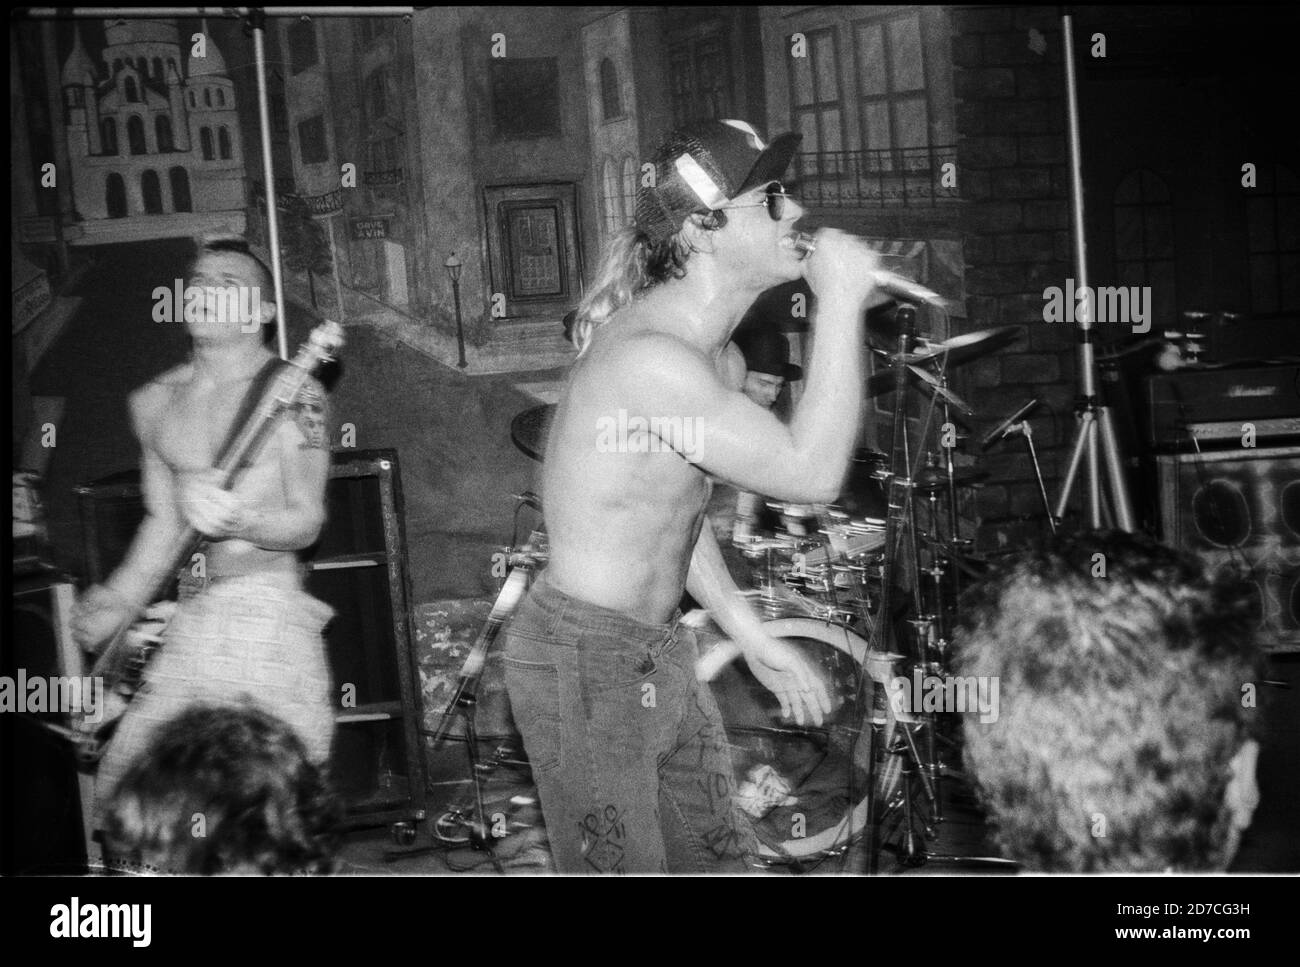 Flea (Peter Michael Balzary, left) and Anthony Kiedis of  Red Hot Chili Peppers performing at the Red Creek Inn, Rochester, NY, USA on November 10th, 1985 Stock Photo